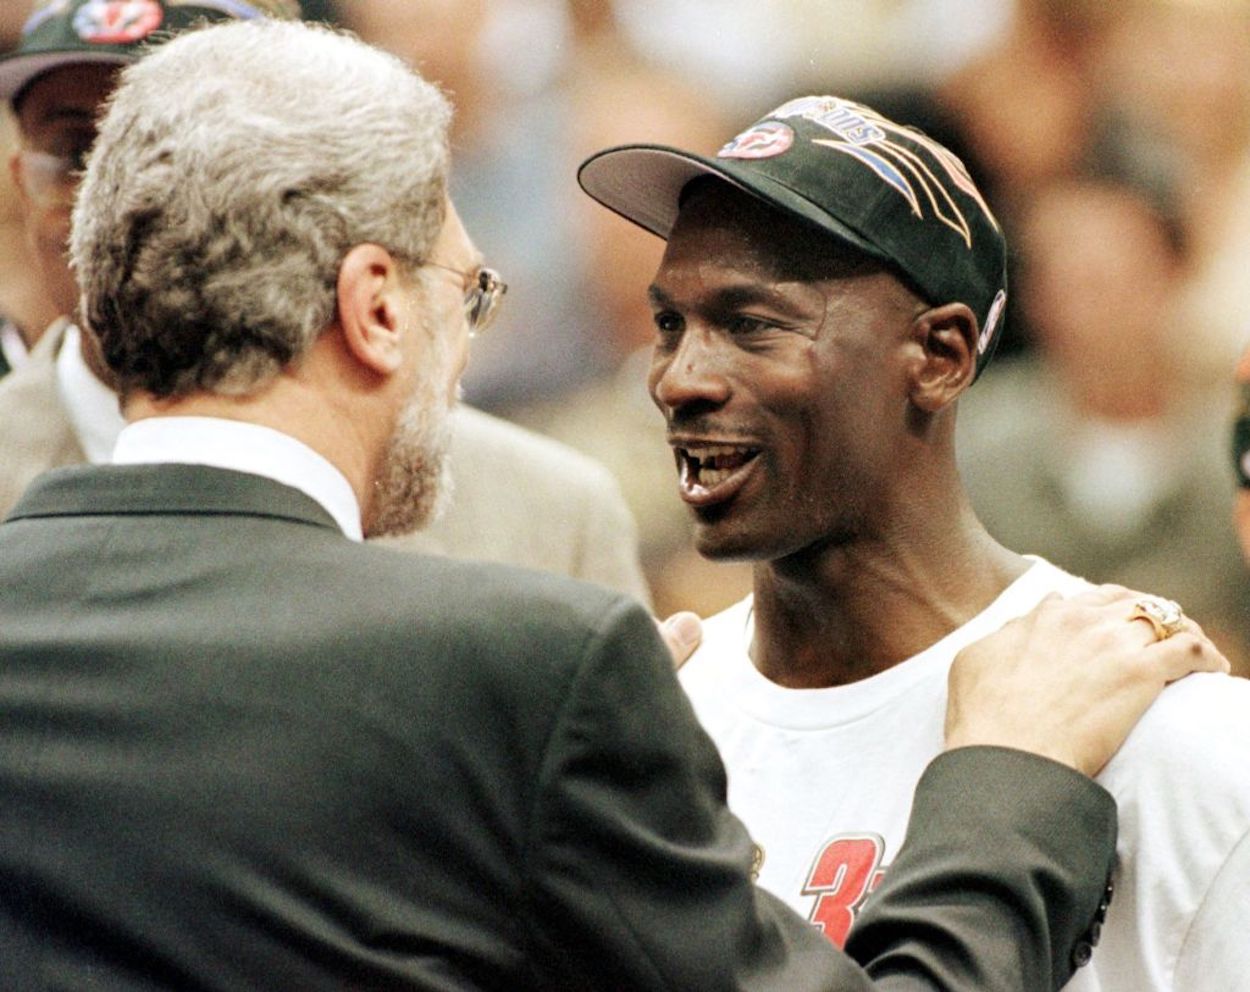 Michael Jordan (R) and Chicago Bulls head coach Phil Jackson (L) exchange words during their time with the Chicago Bulls.